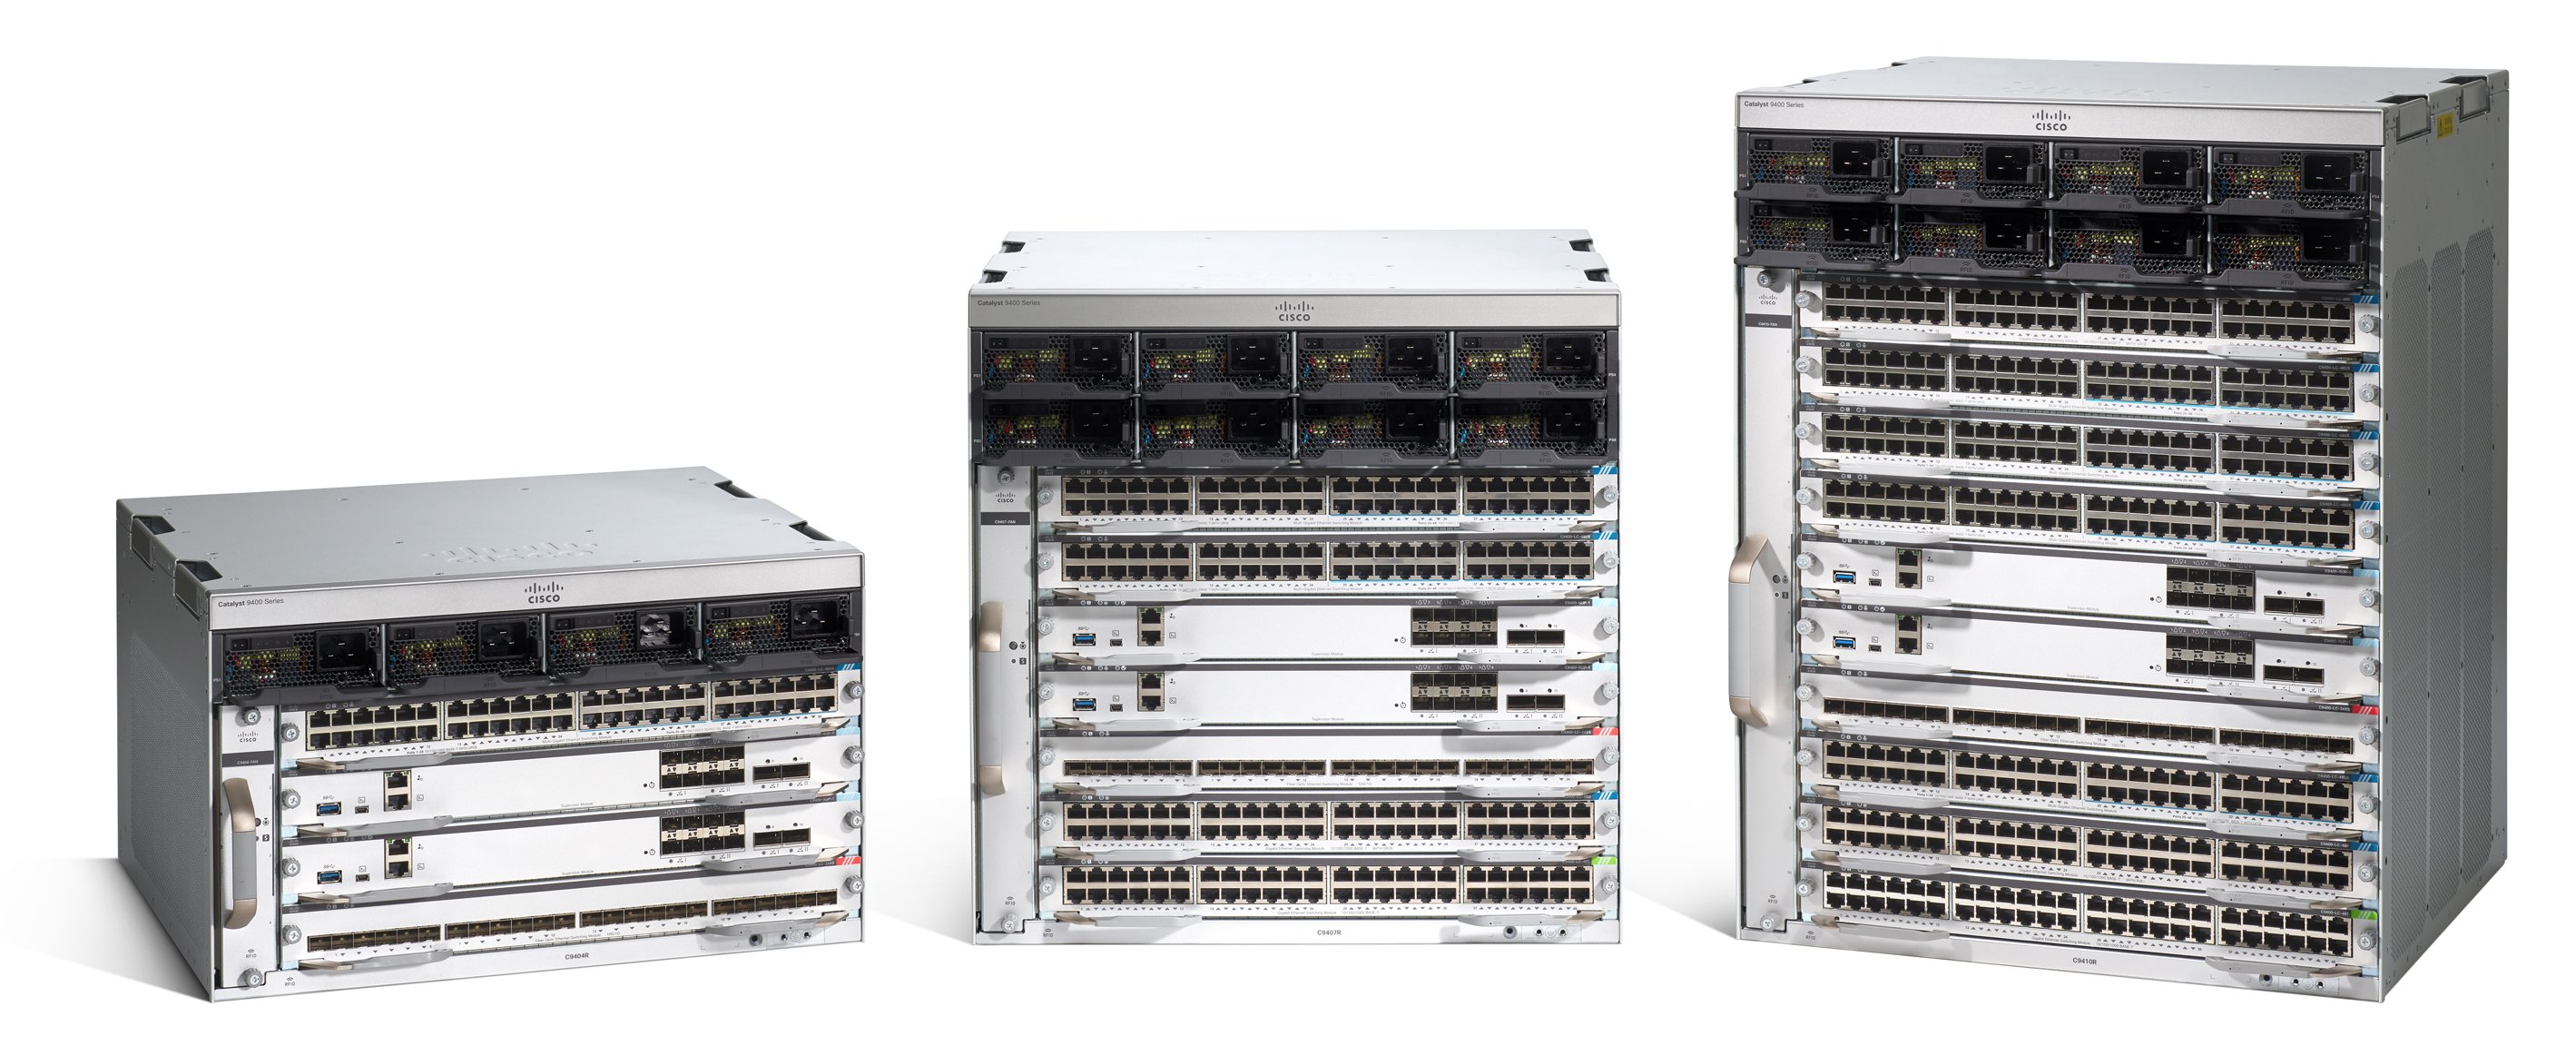 Product image of Cisco Catalyst 9404R Switch